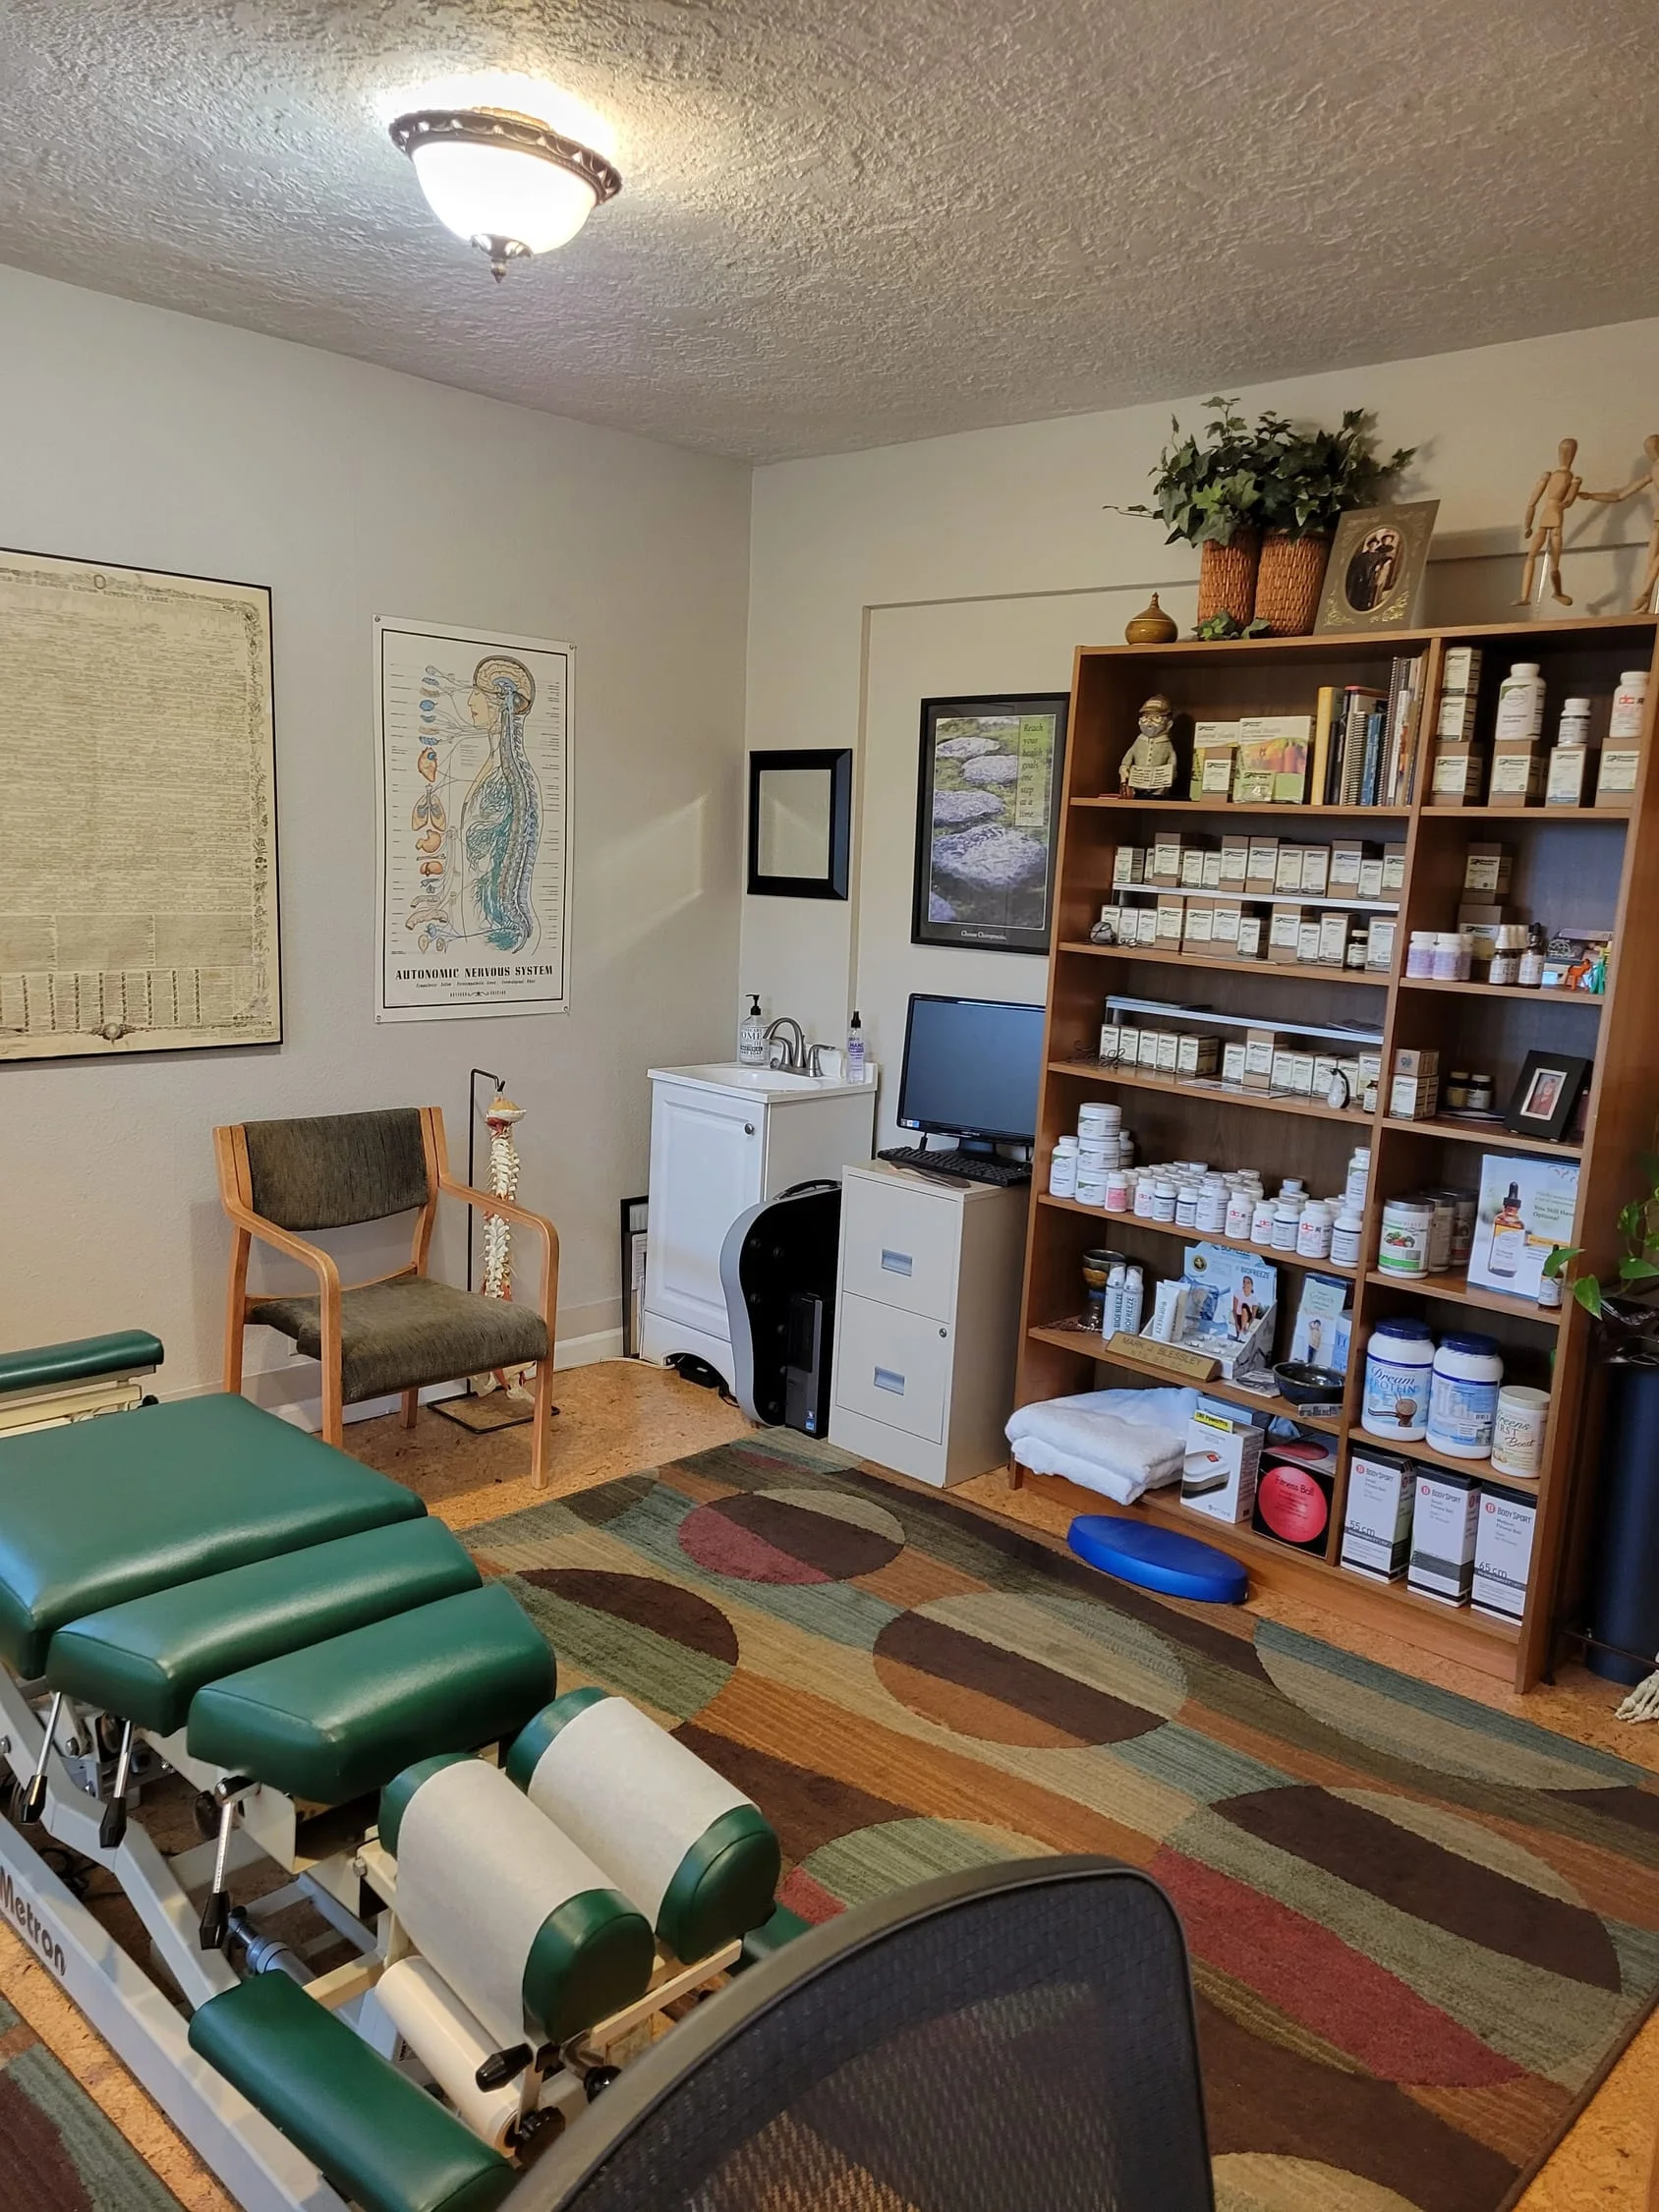 Treatment room NW